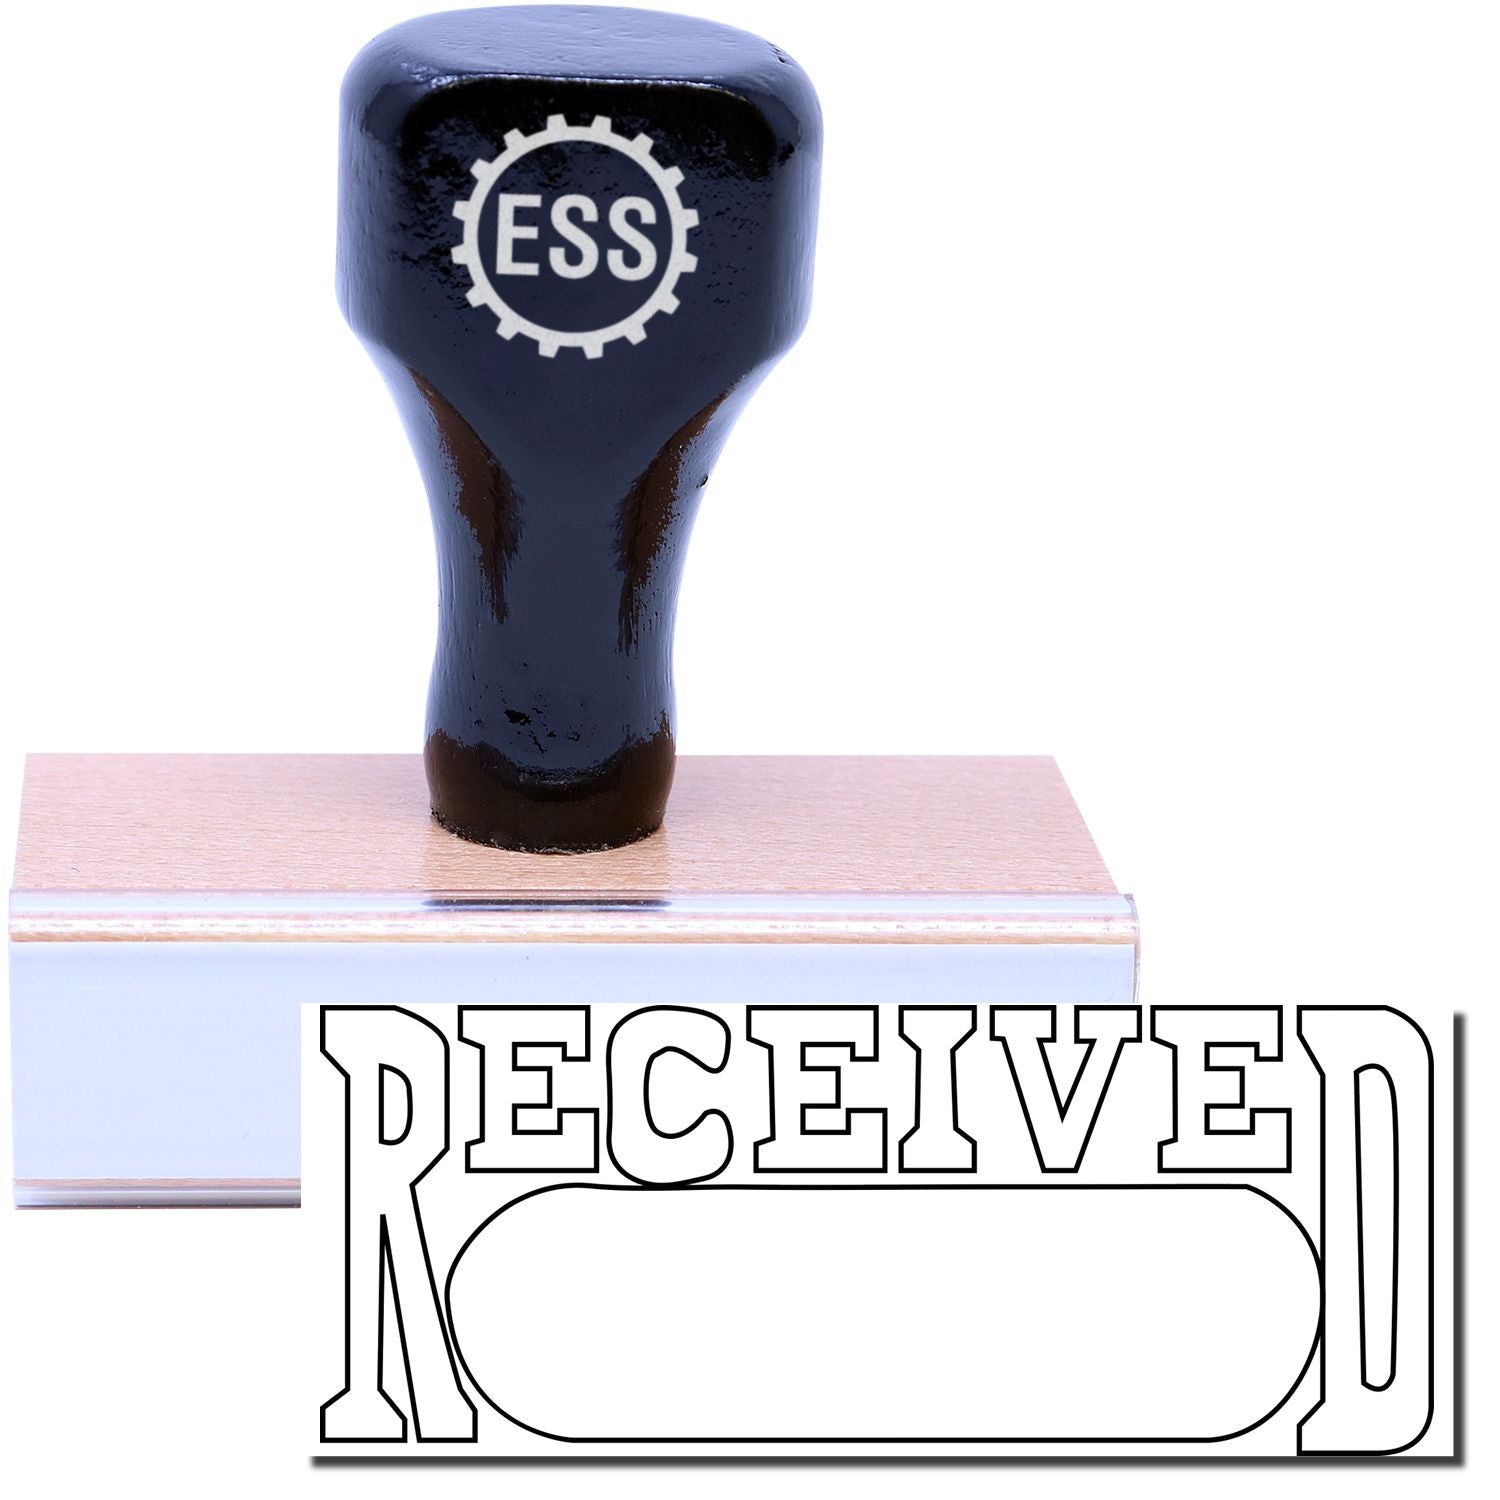 A stock office rubber stamp with a stamped image showing how the text "RECEIVED" in an outline font with a date box is displayed after stamping.